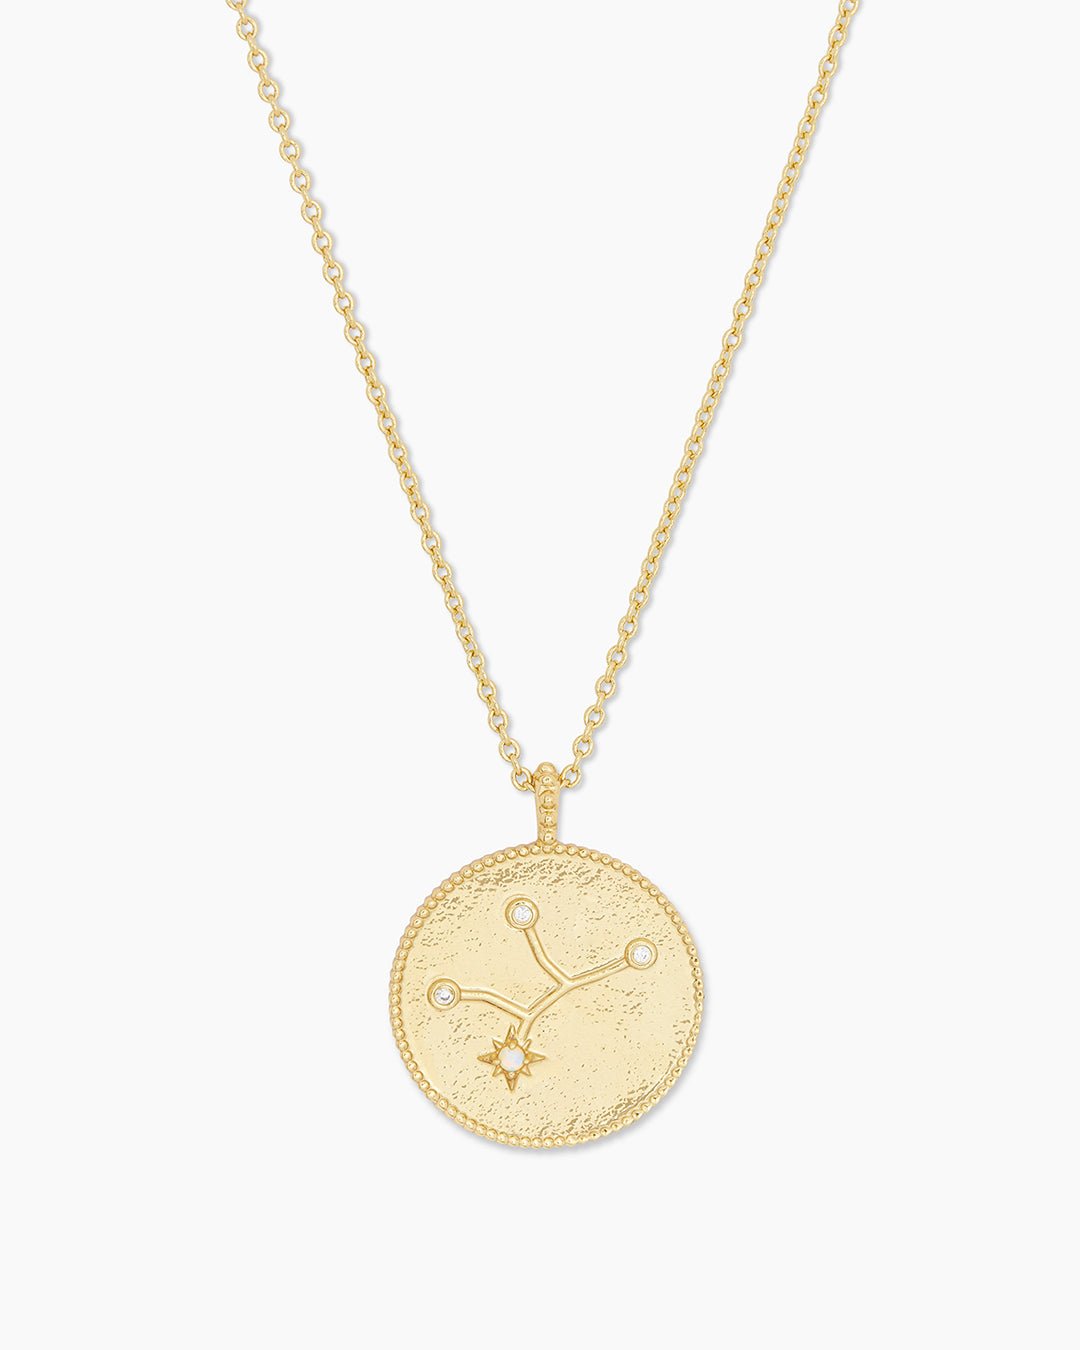  Astrology Coin Necklace (Virgo) || option::Gold Plated, Virgo